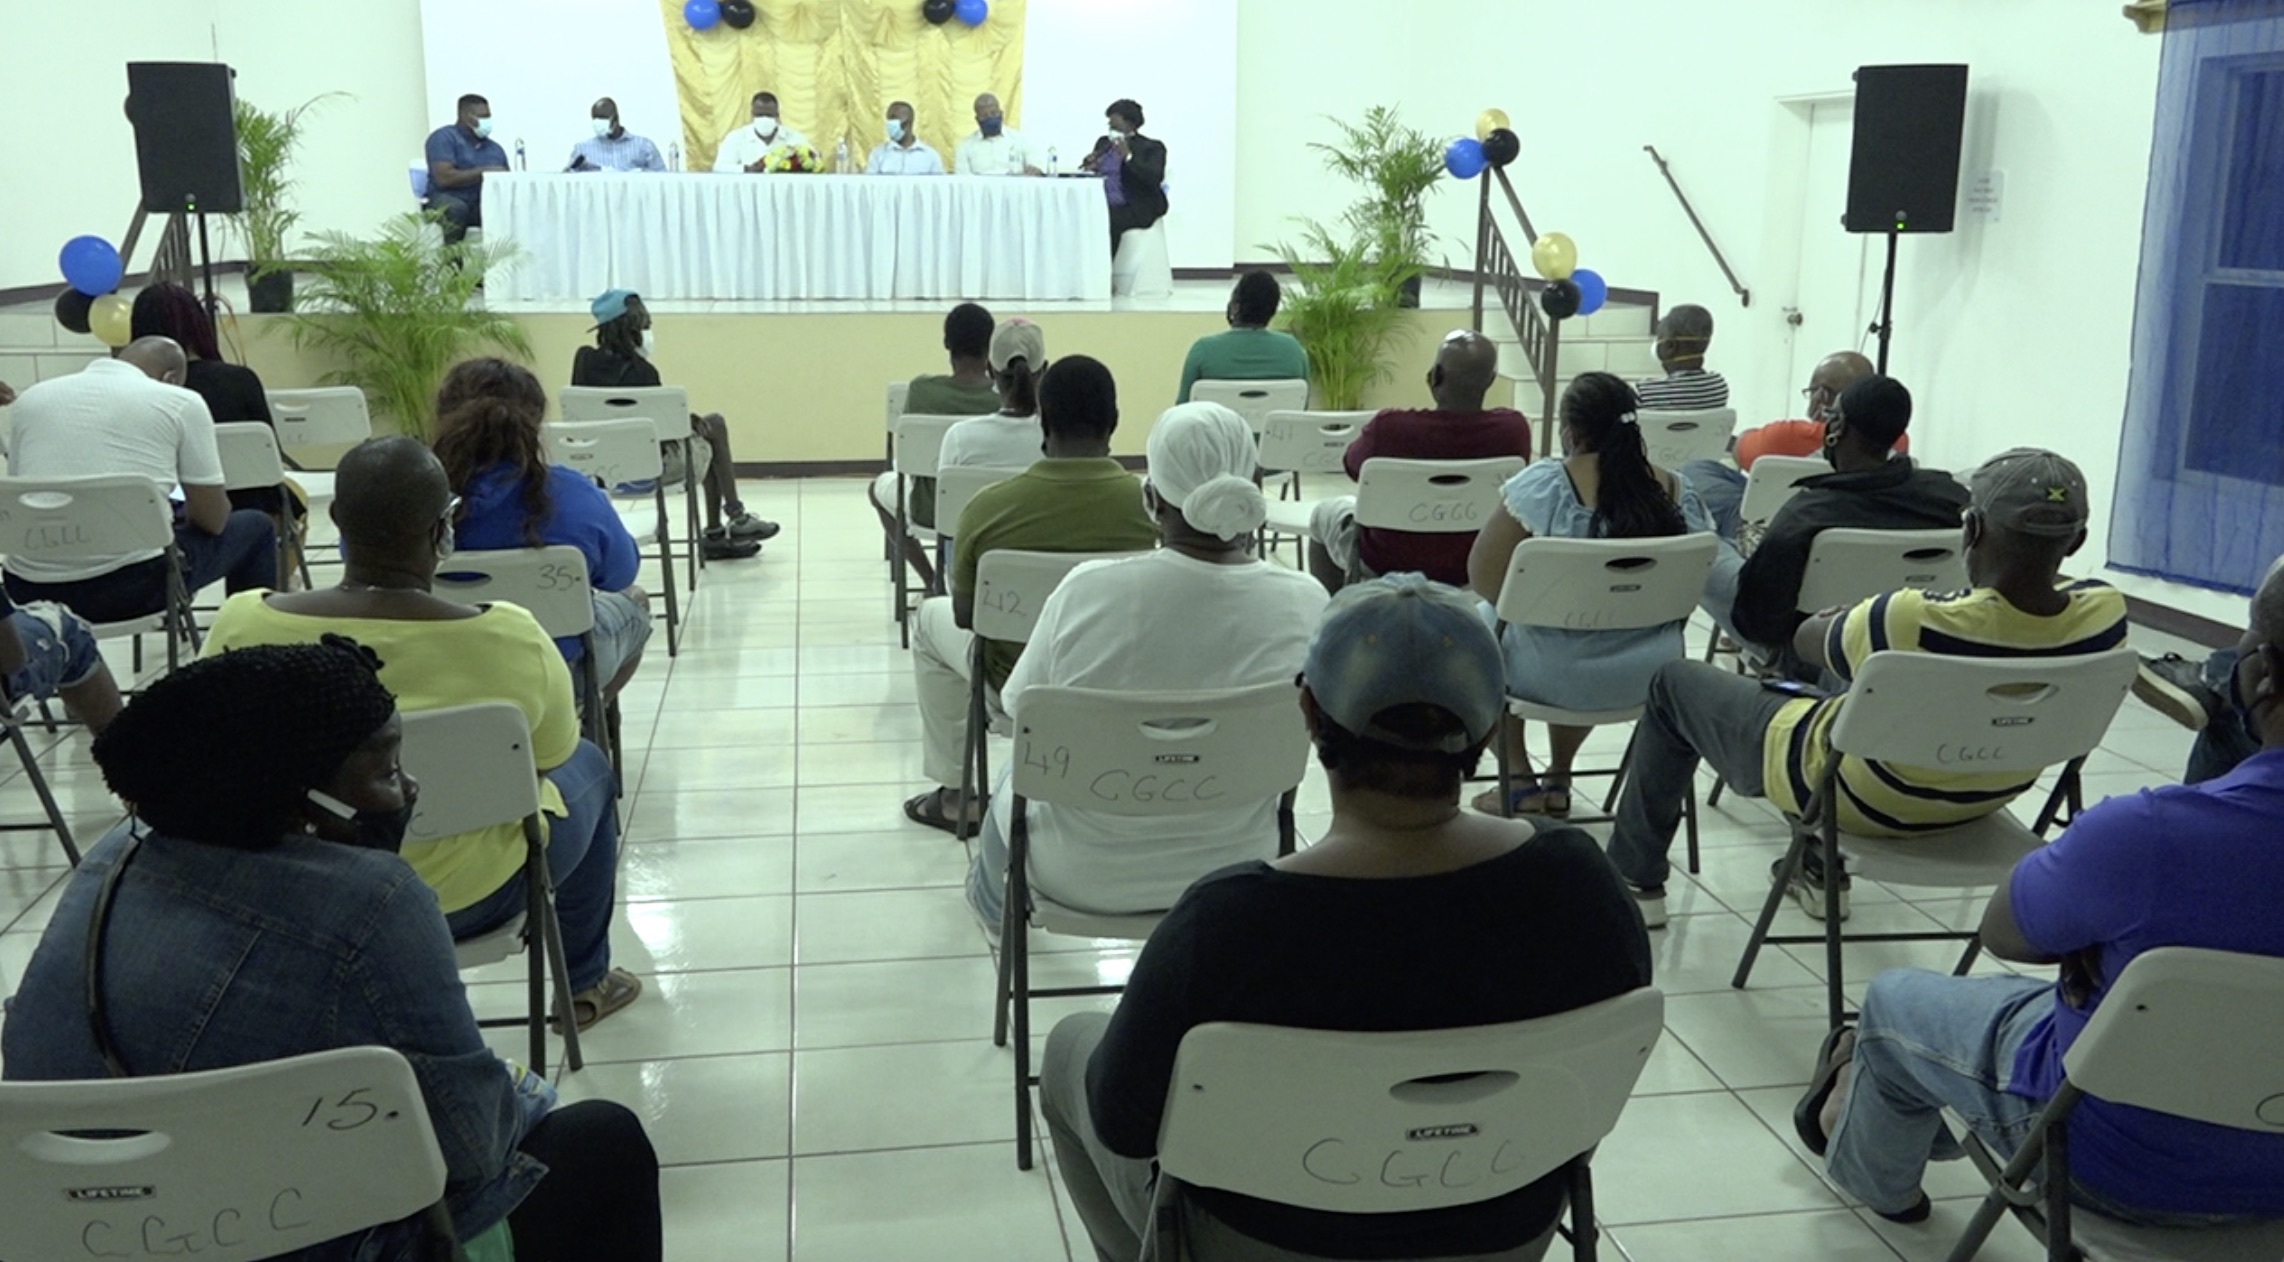 Cross section of the audience at the July 23, 2020 town hall meeting at the Cotton Ground Community Centre, hosted by the Nevis Island Administration